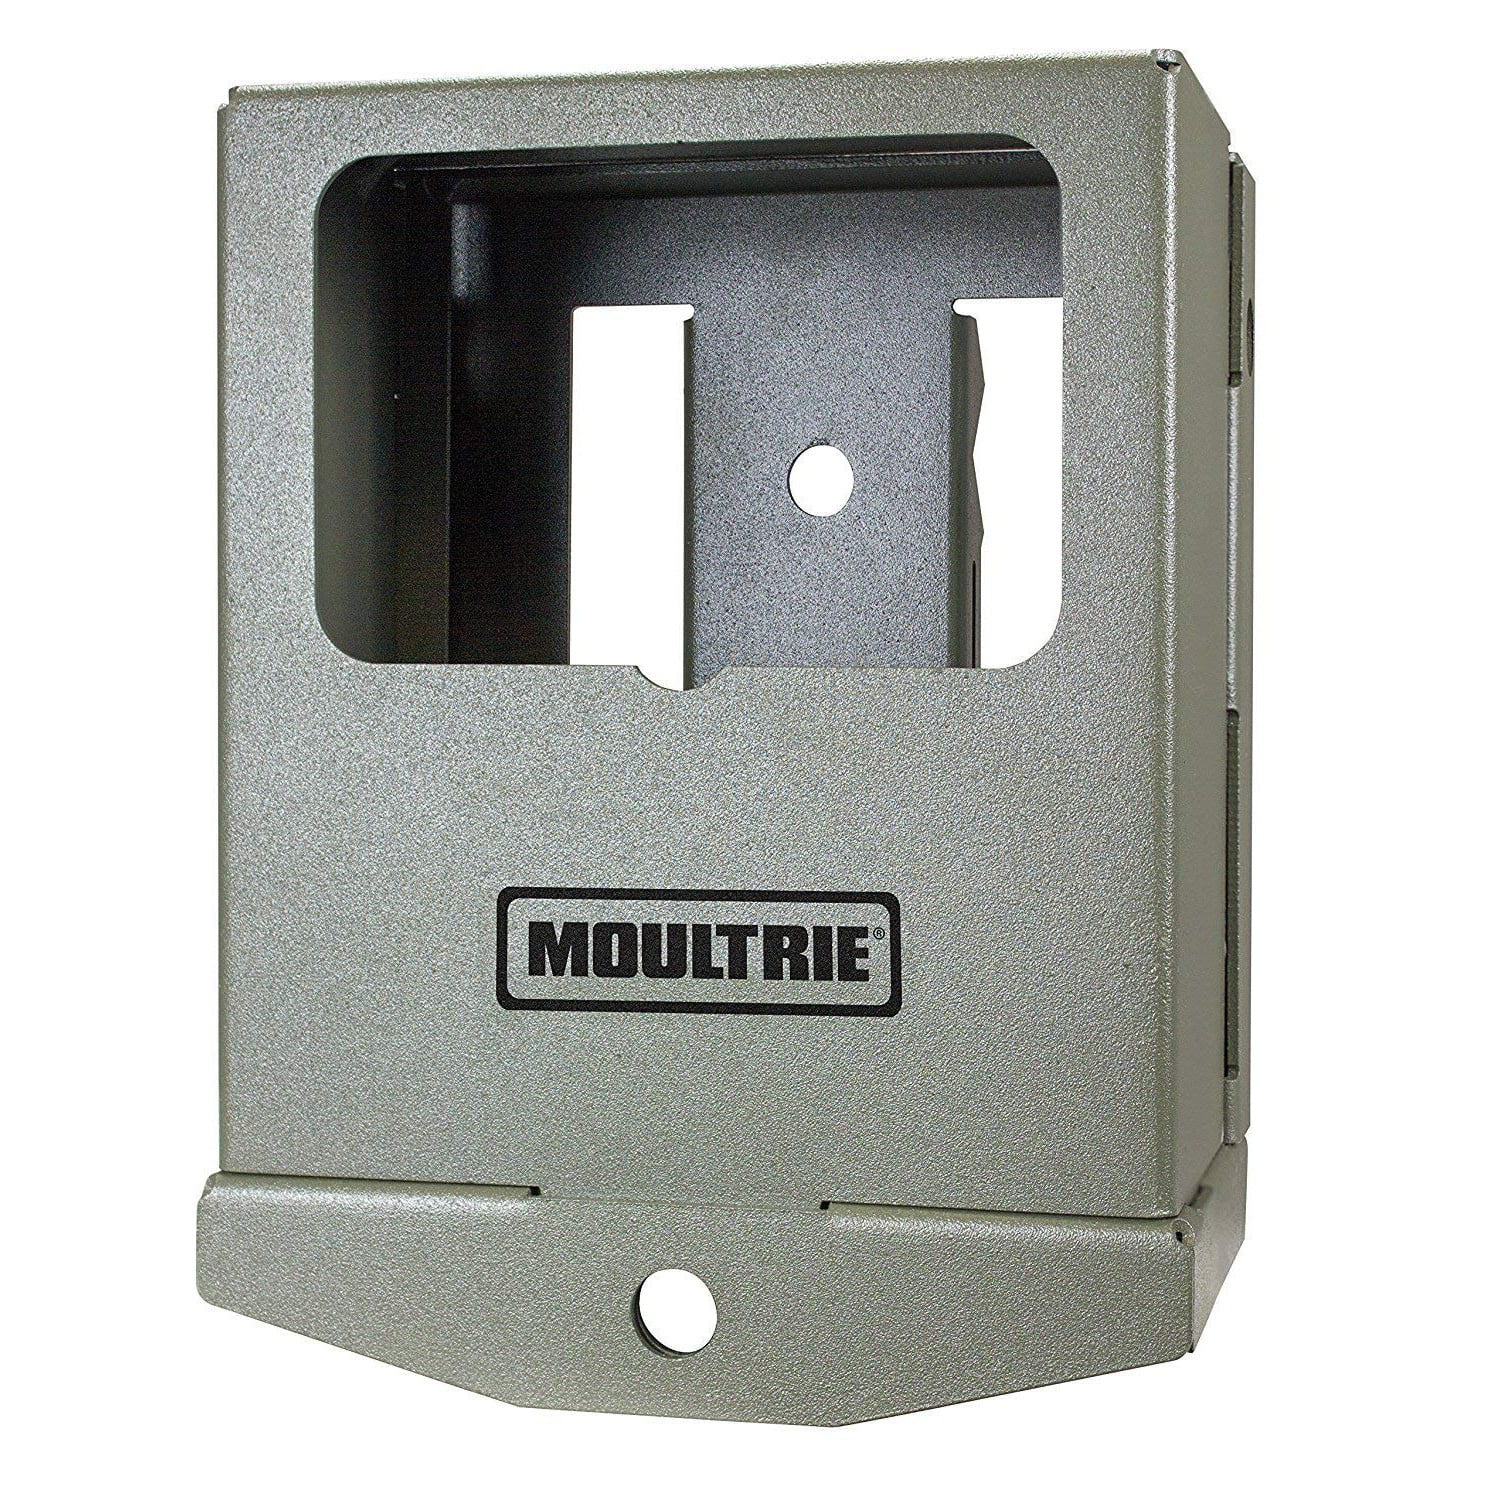 Box Only Camlock Security Box Moultrie White Flash 